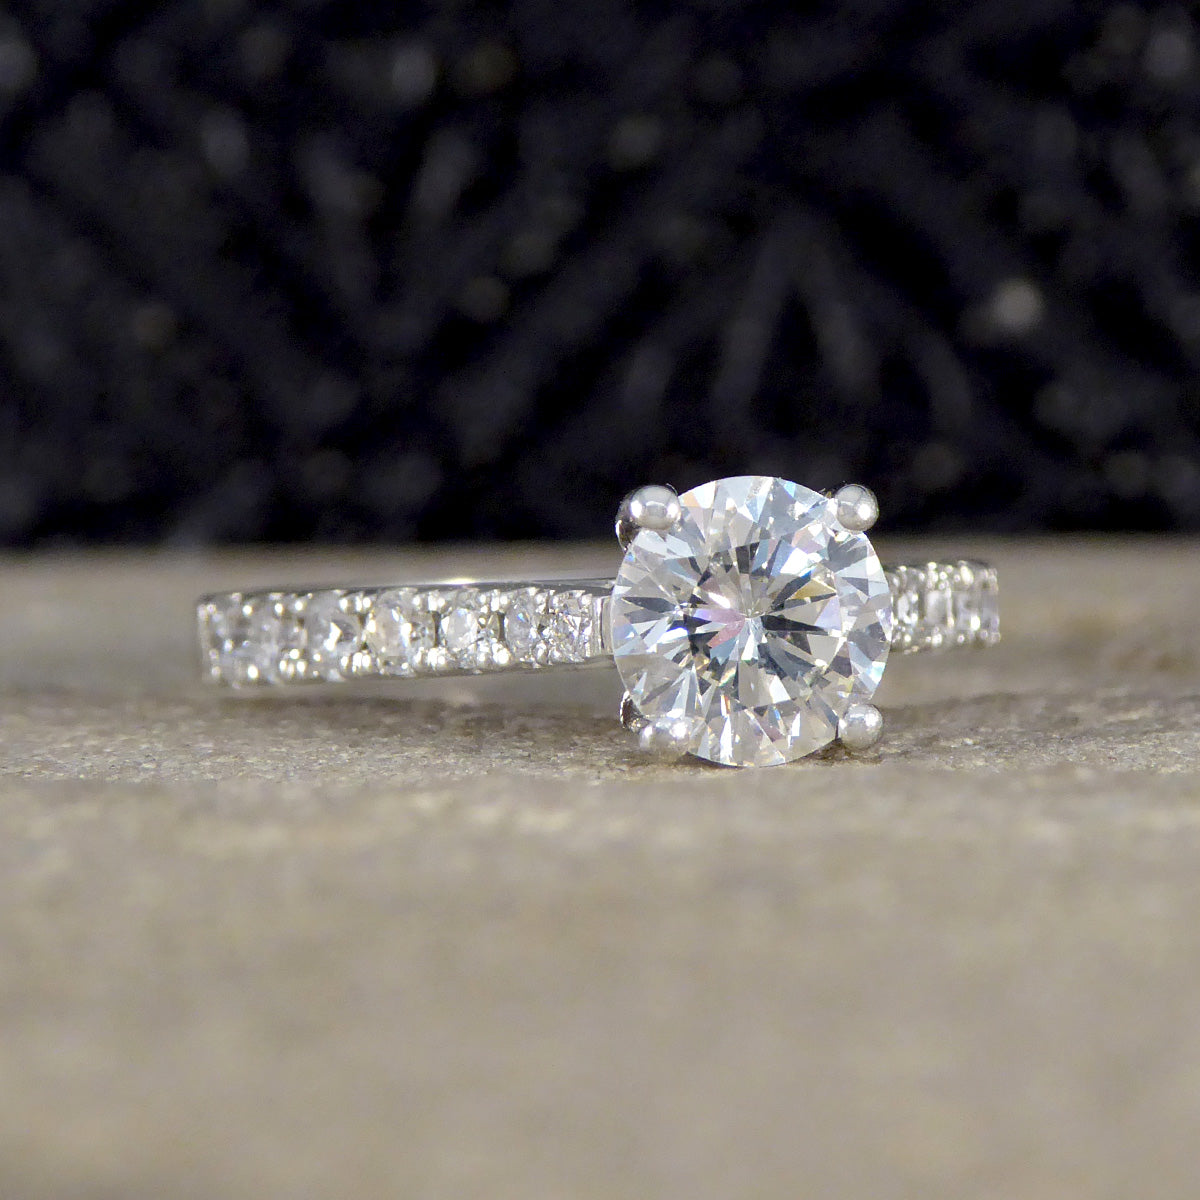 0.85ct Diamond Solitaire Engagement Ring with Diamond Set Shoulders in Platinum